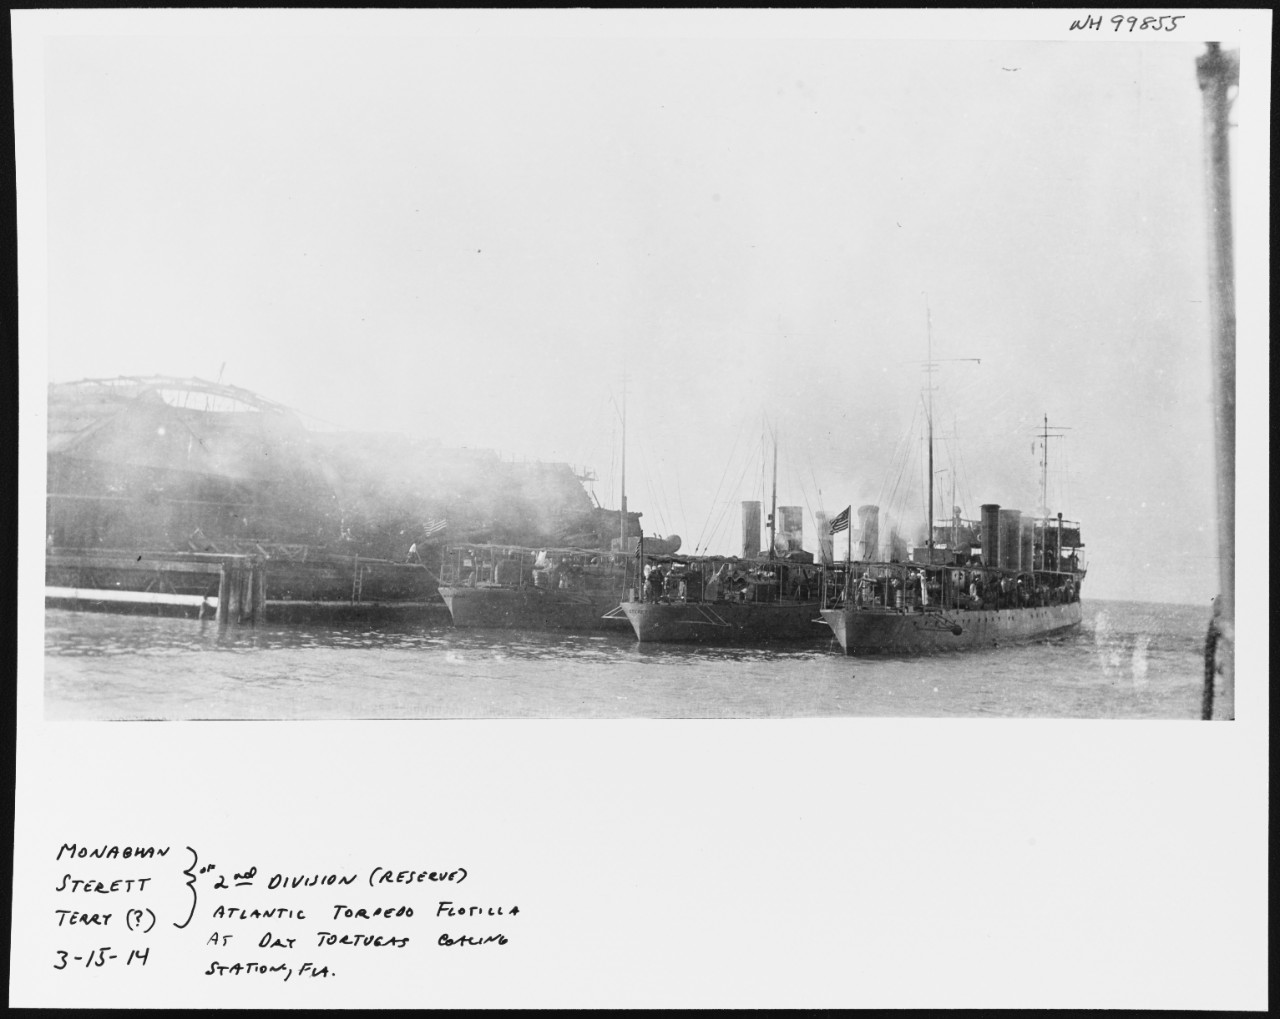 Photo #: NH 99855  Destroyers at Dry Tortugas coaling station, Florida, 15 March 1914